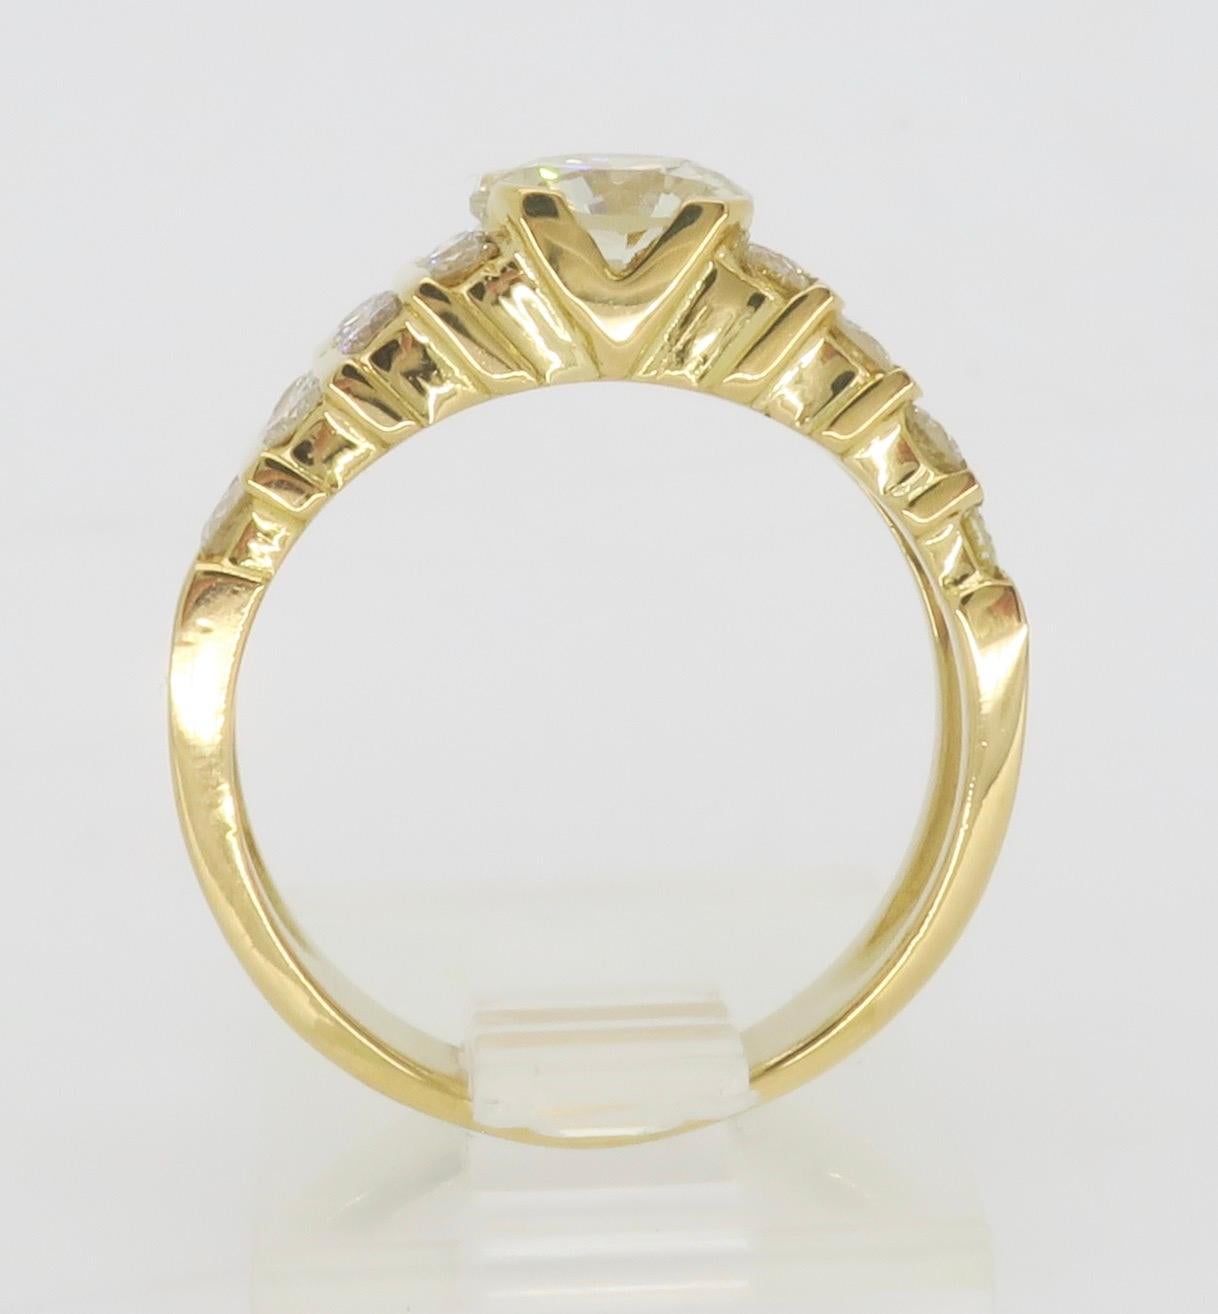 1.54ctw Diamond Encrusted Ring in 14k Yellow Gold For Sale 9